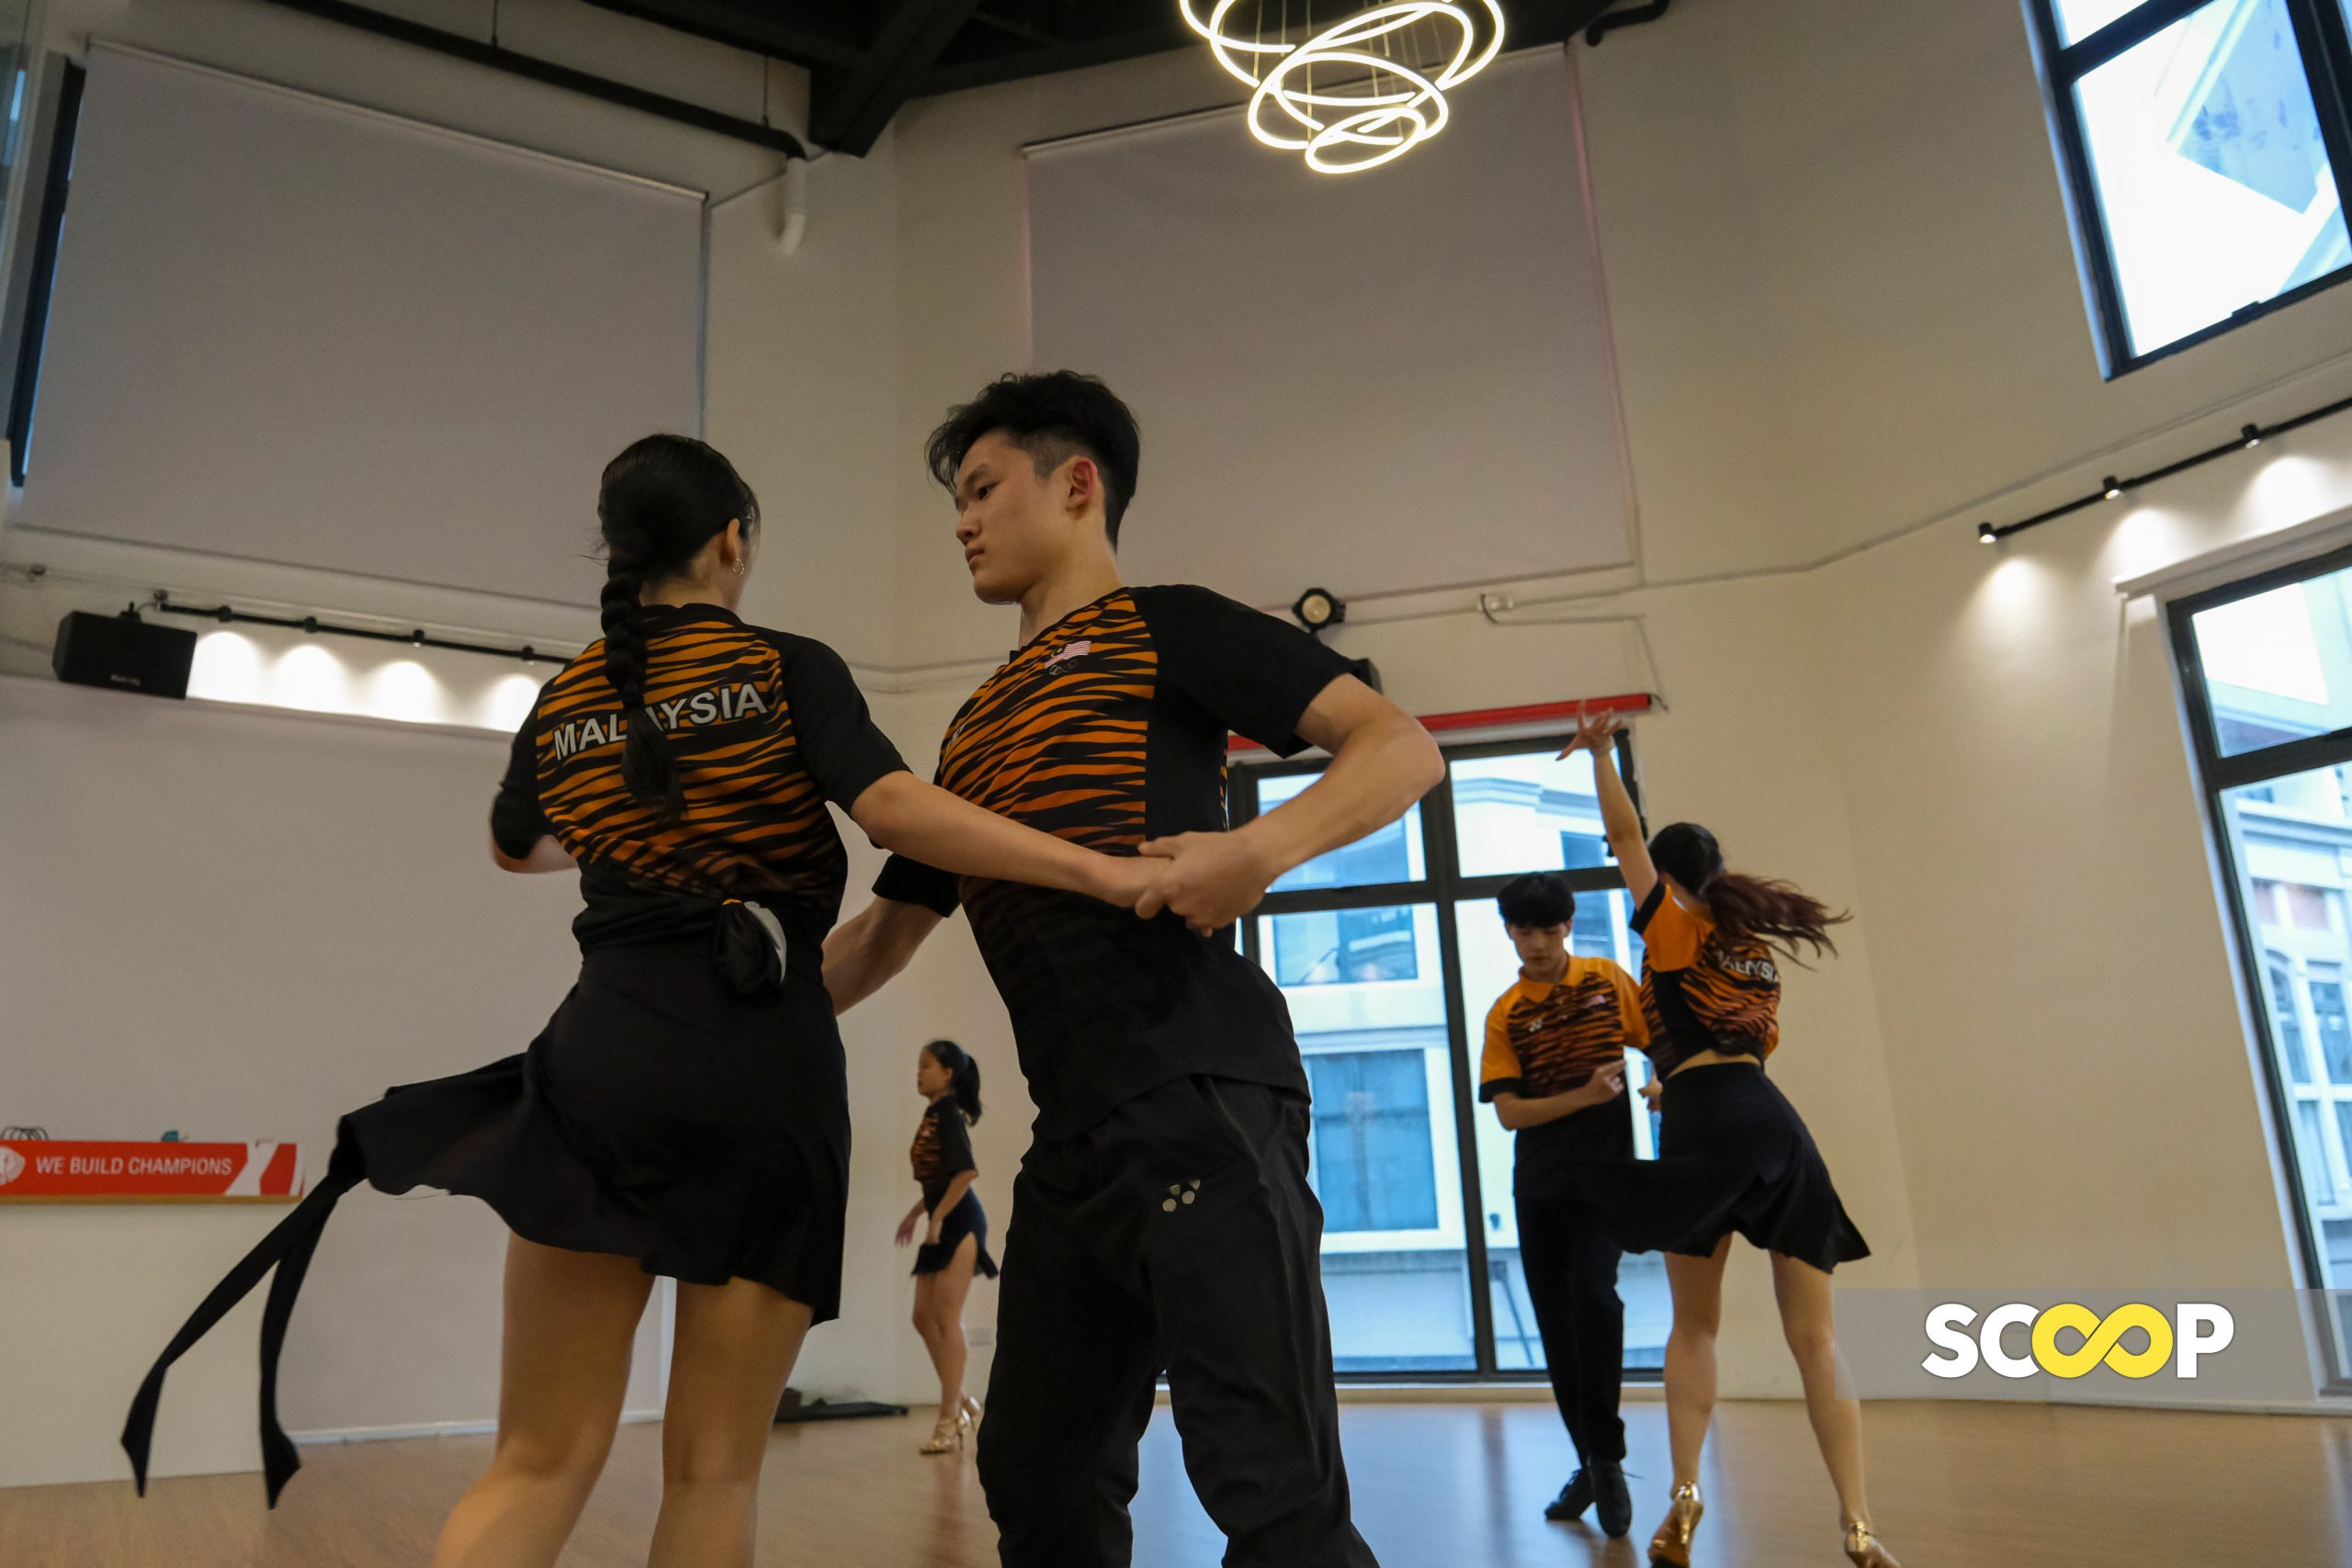 Respect and recognition is all we ask for: Malaysian dancesport athletes